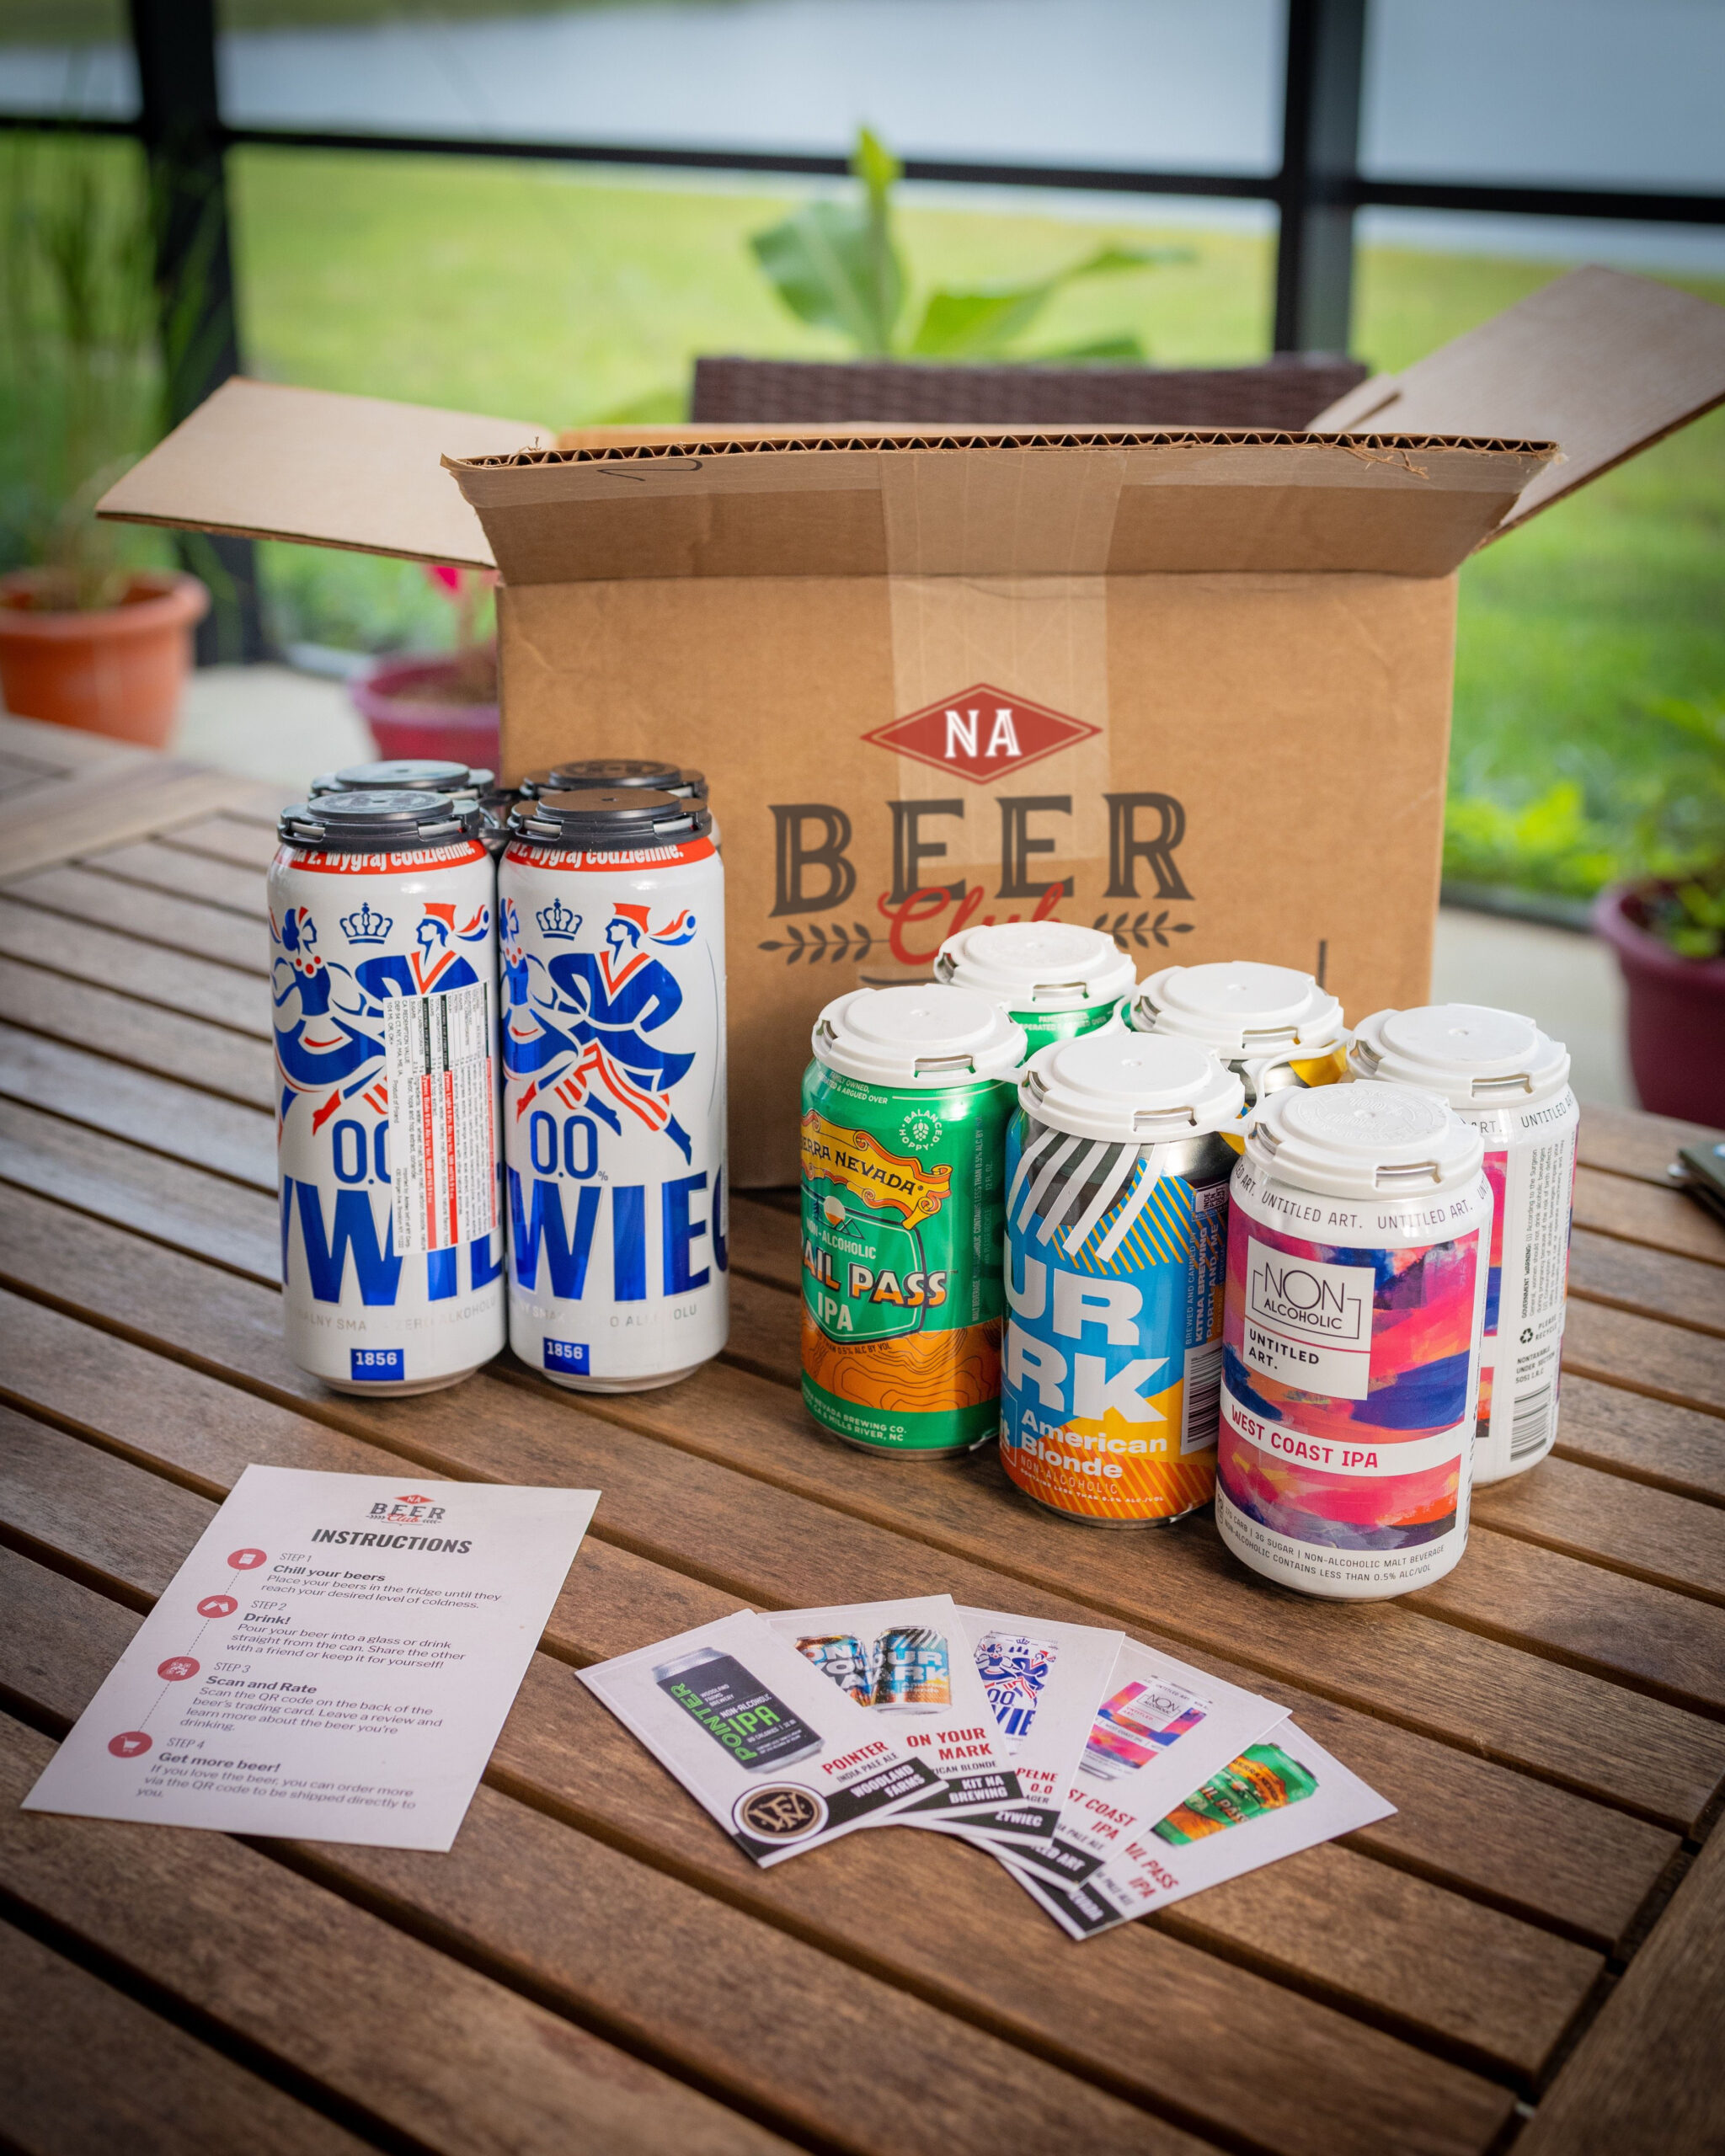 NA Beer Club's non-alcoholic beer of the month subscription service of new and unique non-alcoholic beers delivered to your door each month